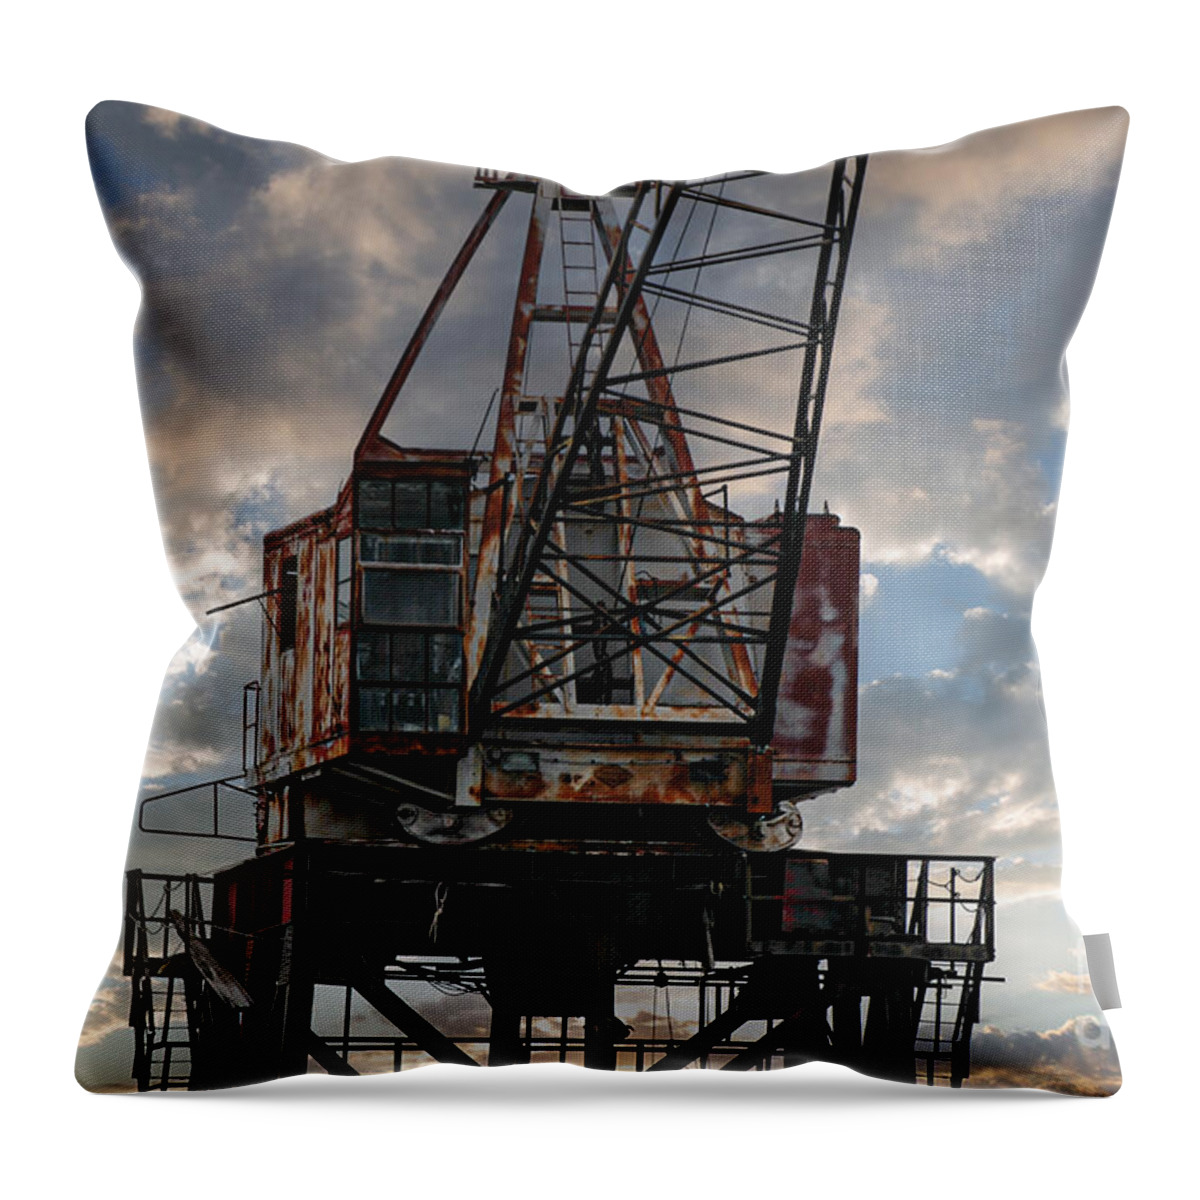 Crane Throw Pillow featuring the photograph Just Needs Some WD40 by Dale Powell